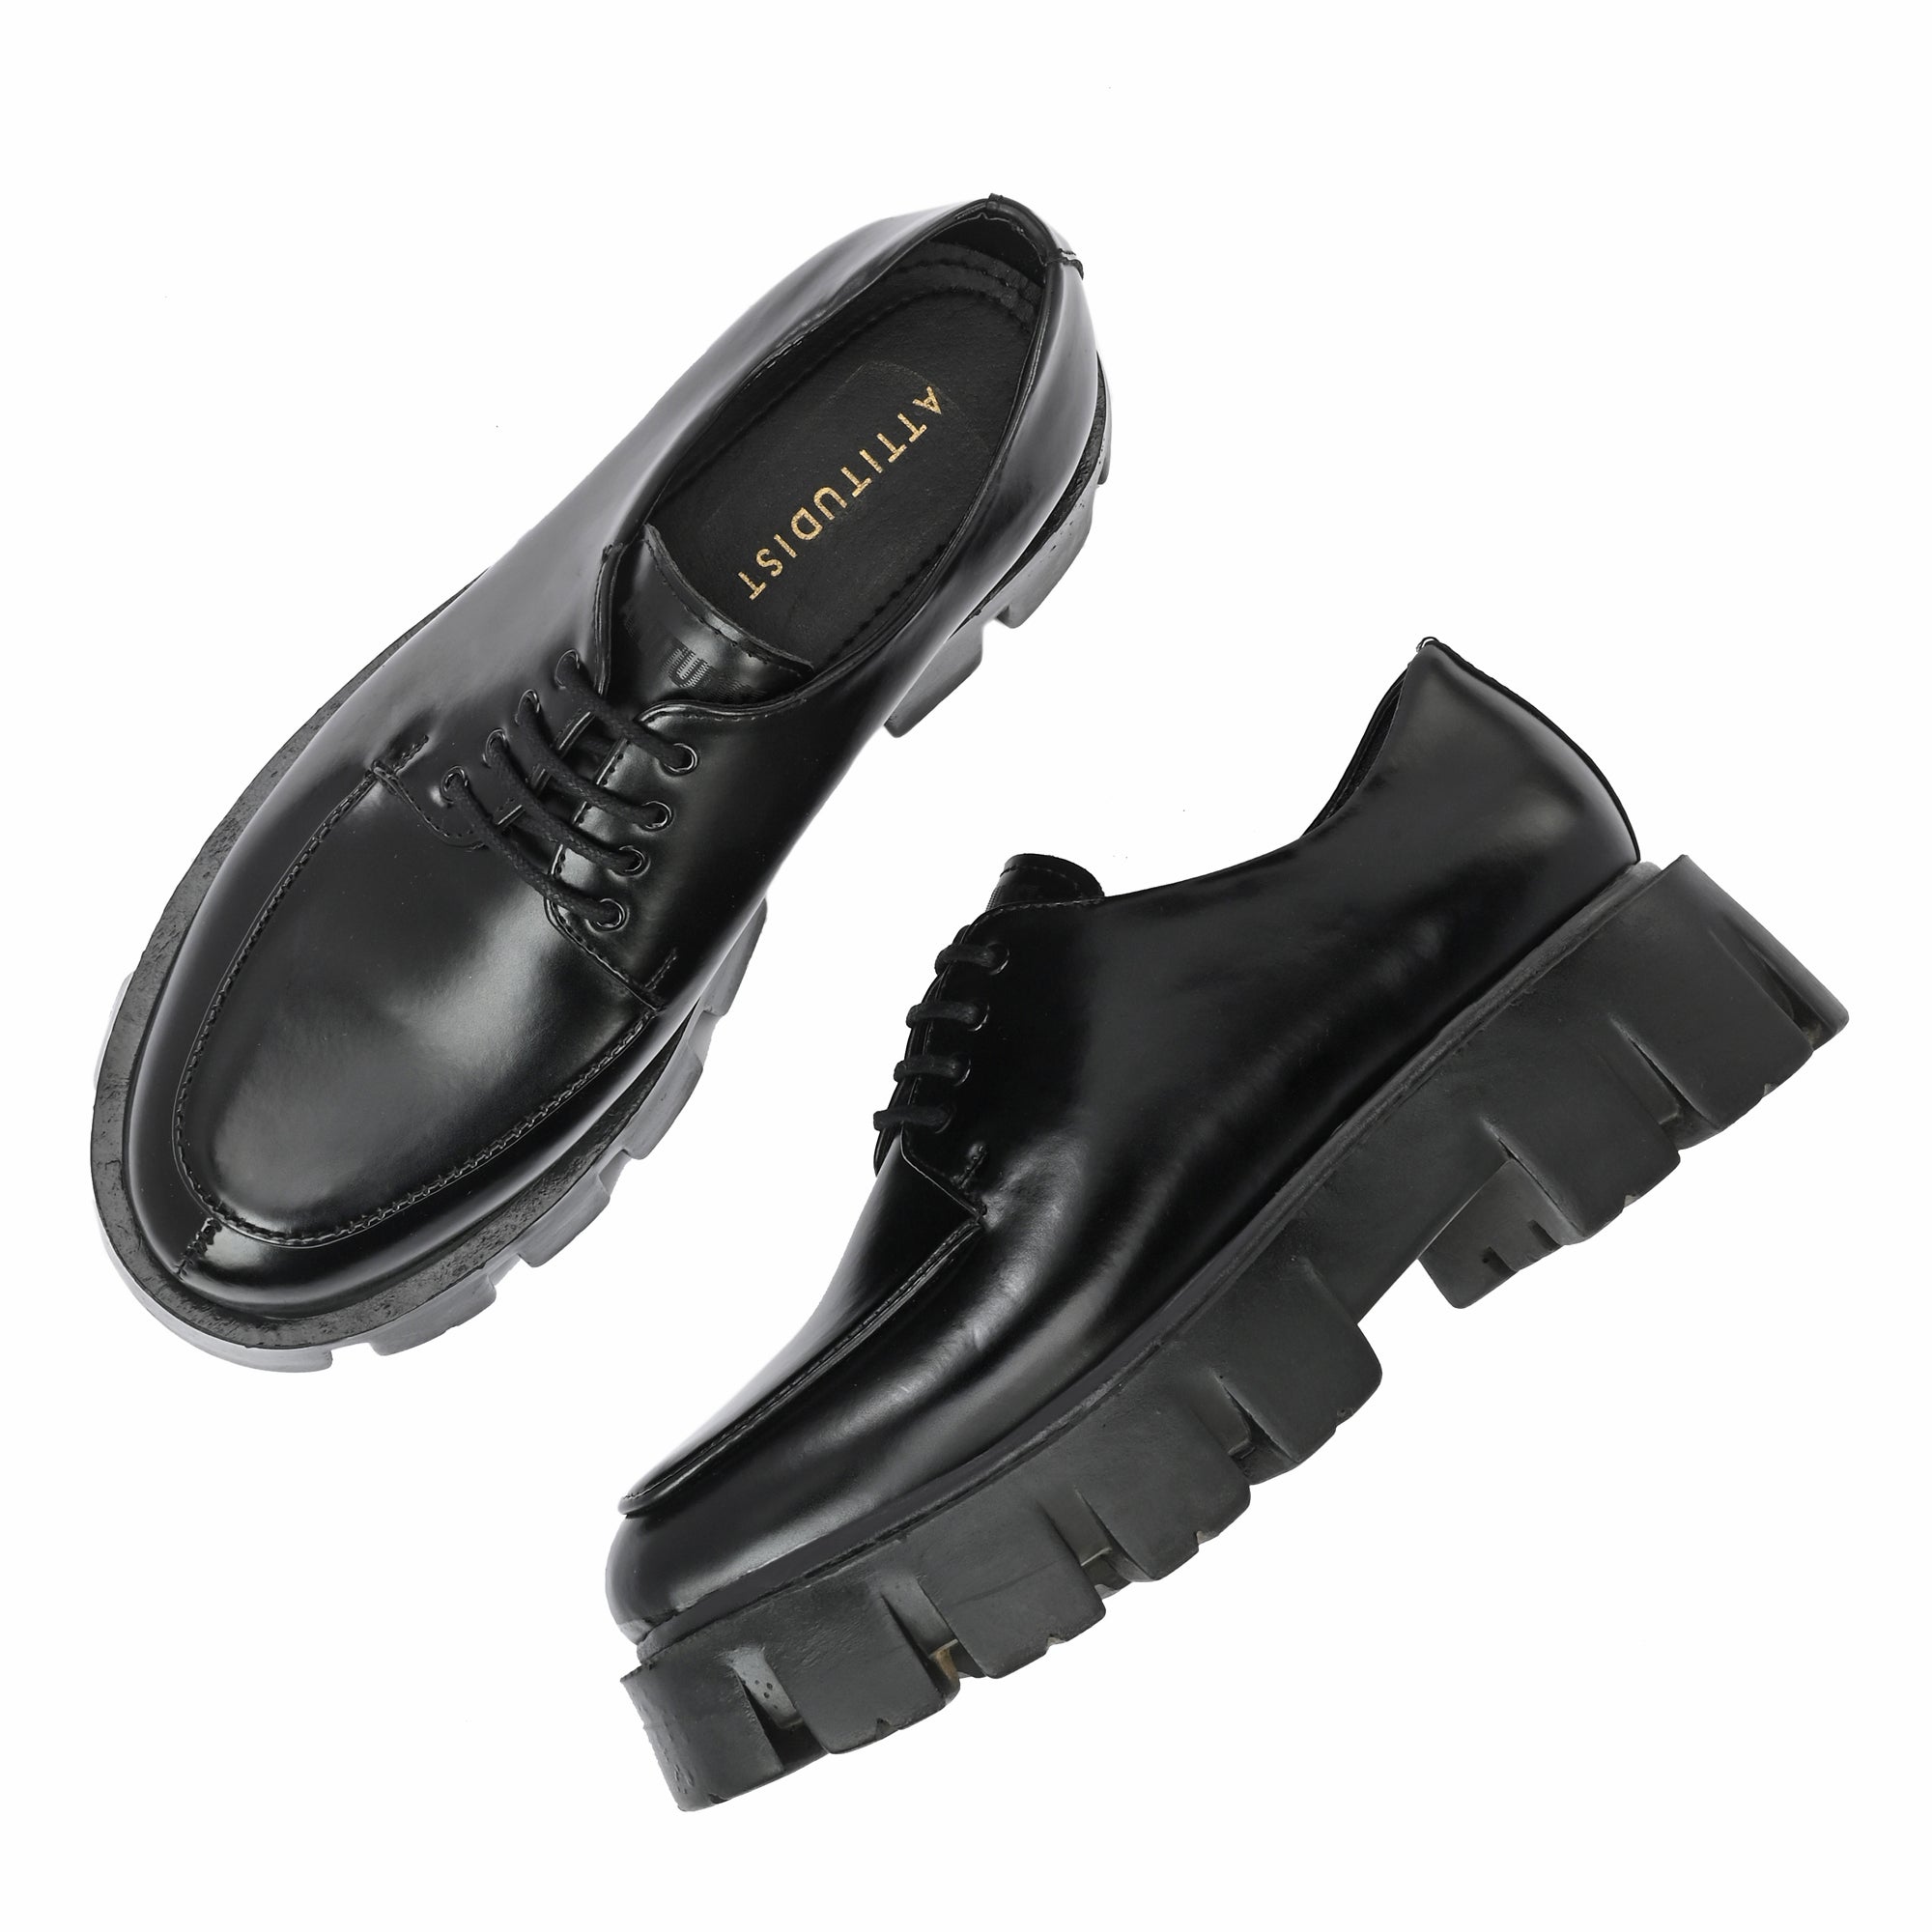 Patent-leather Derby shoes